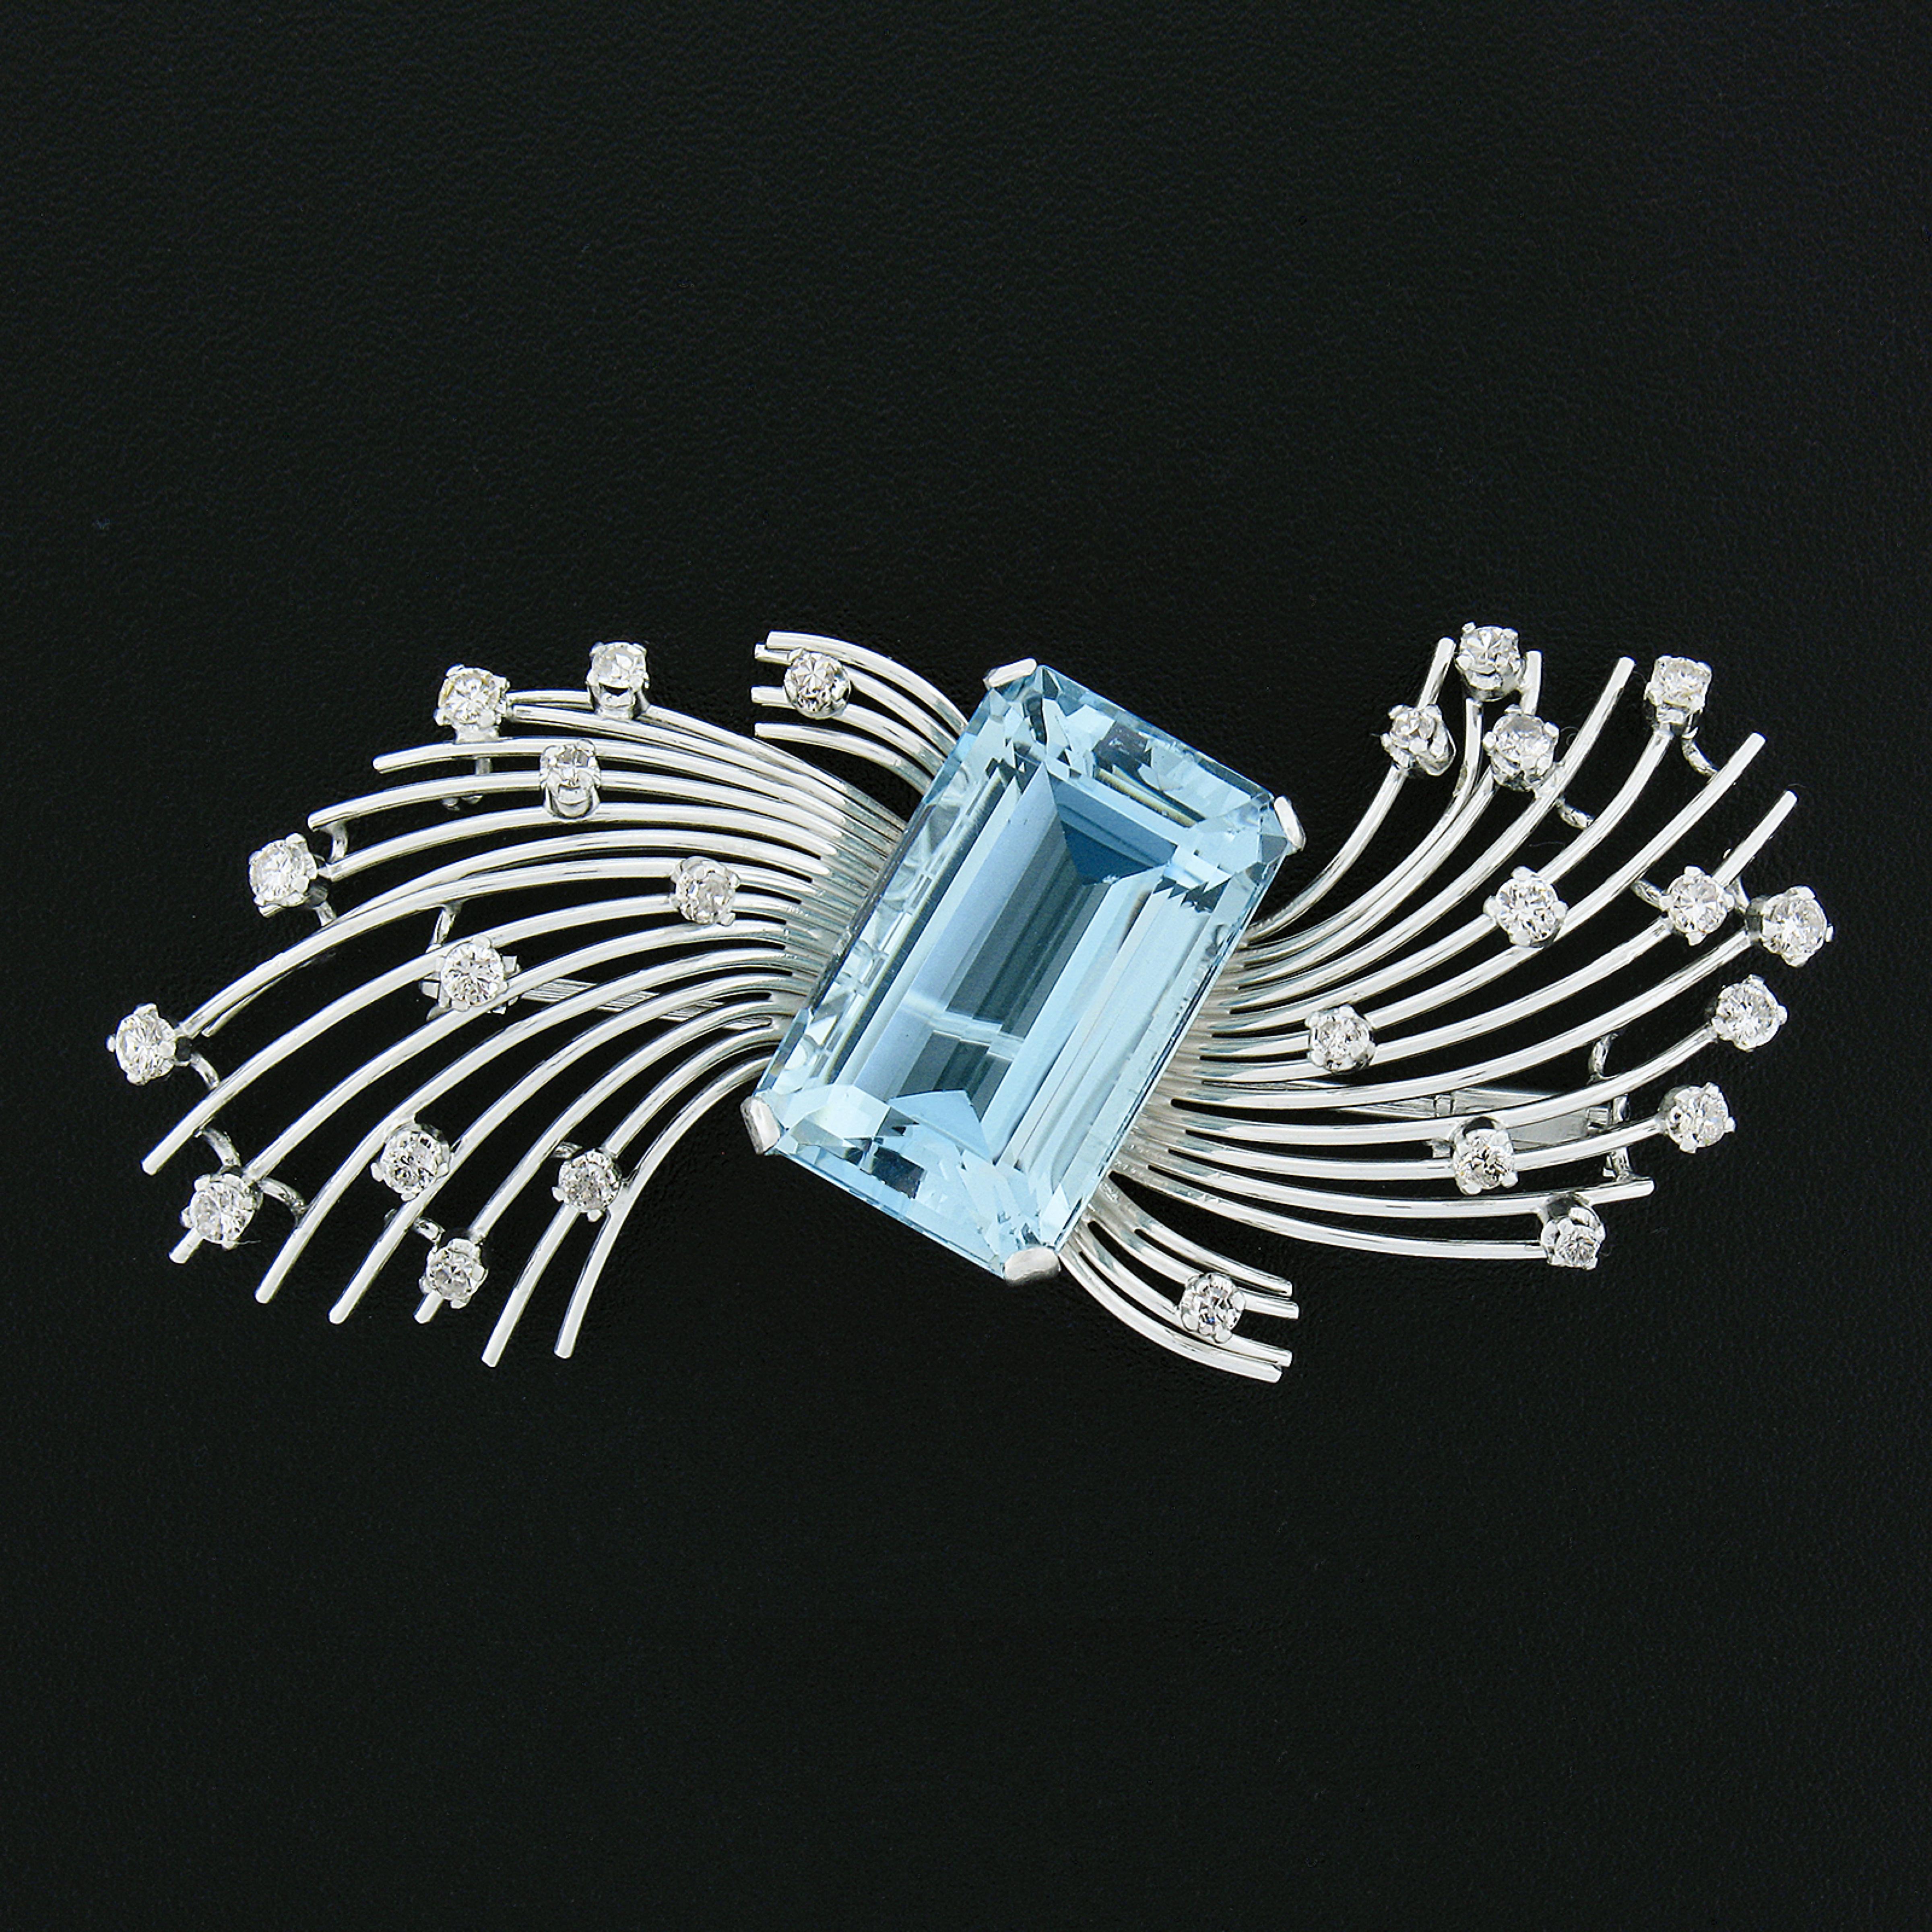 Here we have a magnificent vintage brooch that was hand crafted from solid platinum. The brooch features a large, approximately 19.65 carat, GIA certified, natural aquamarine neatly prong set at the center of the beautiful handmade wire design. The